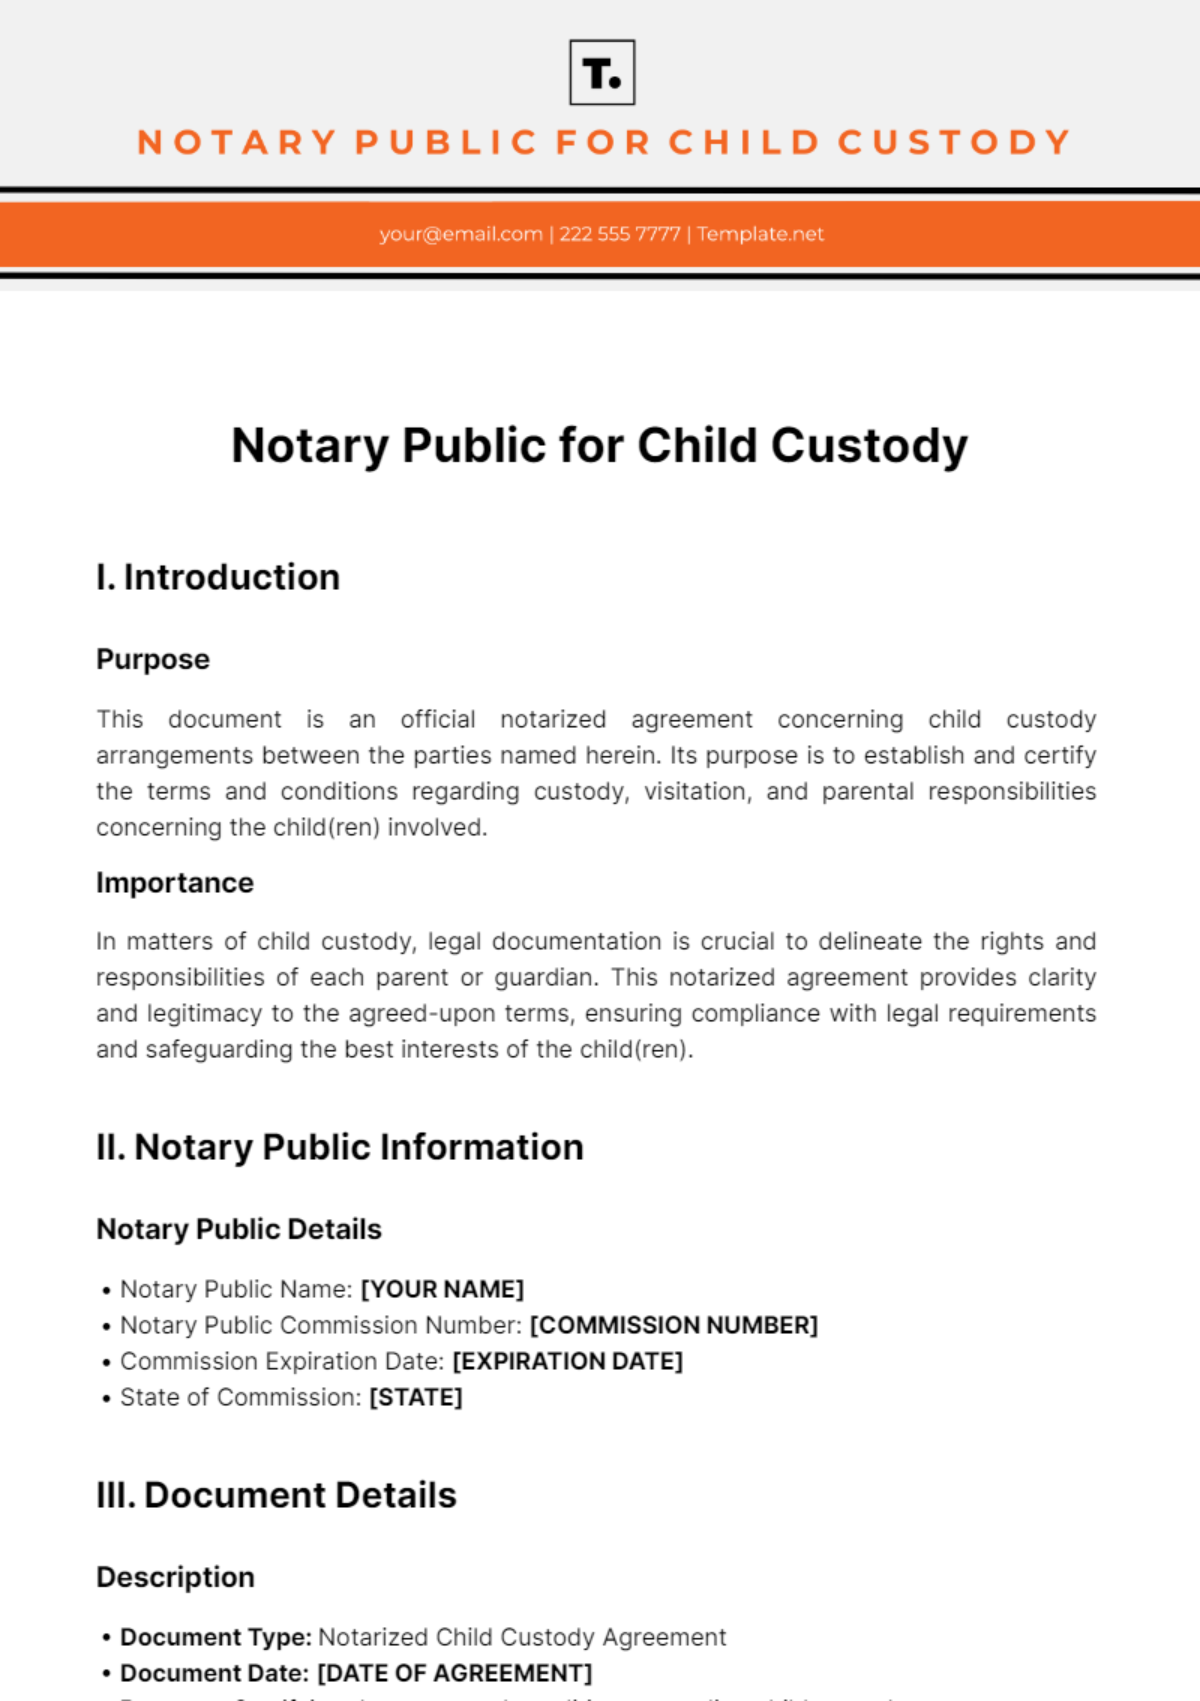 Free Notary Public For Child Custody Template